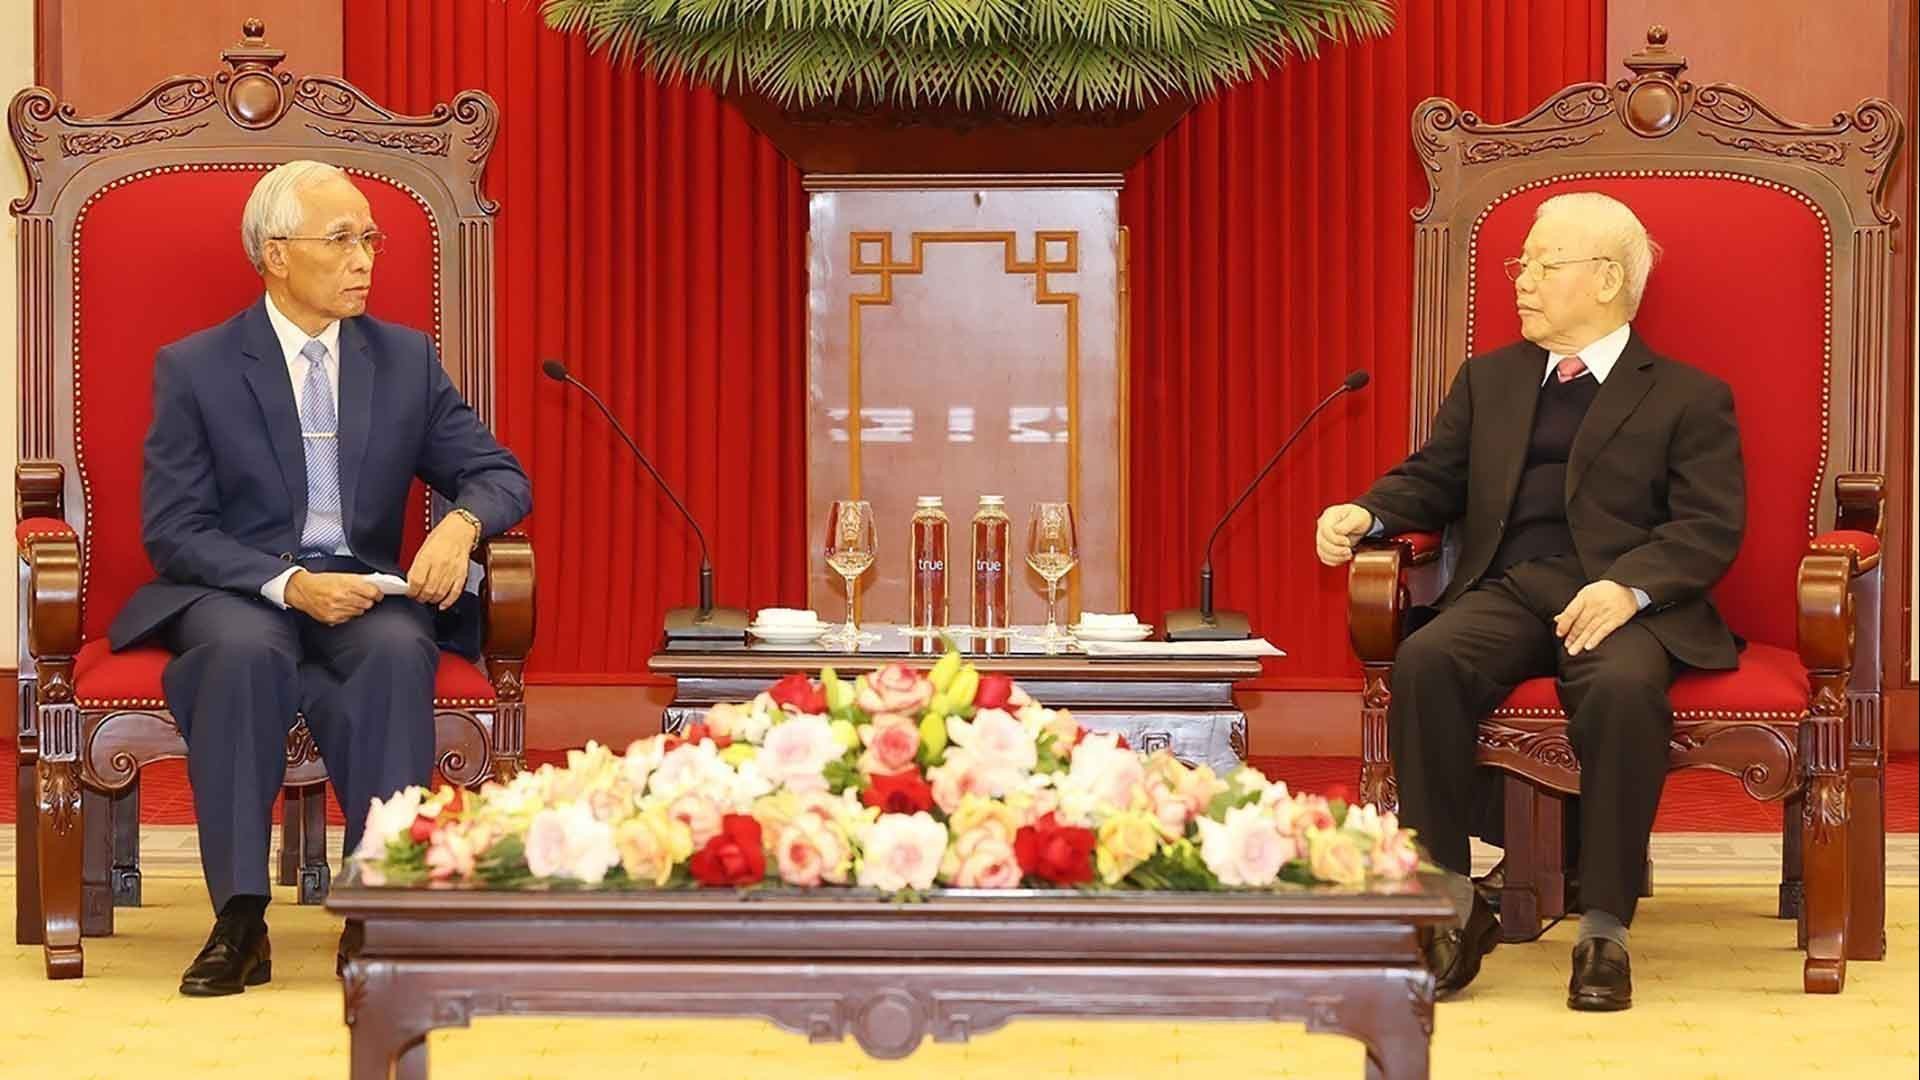 Party chief: Vietnam treasures faithful relationship with Laos